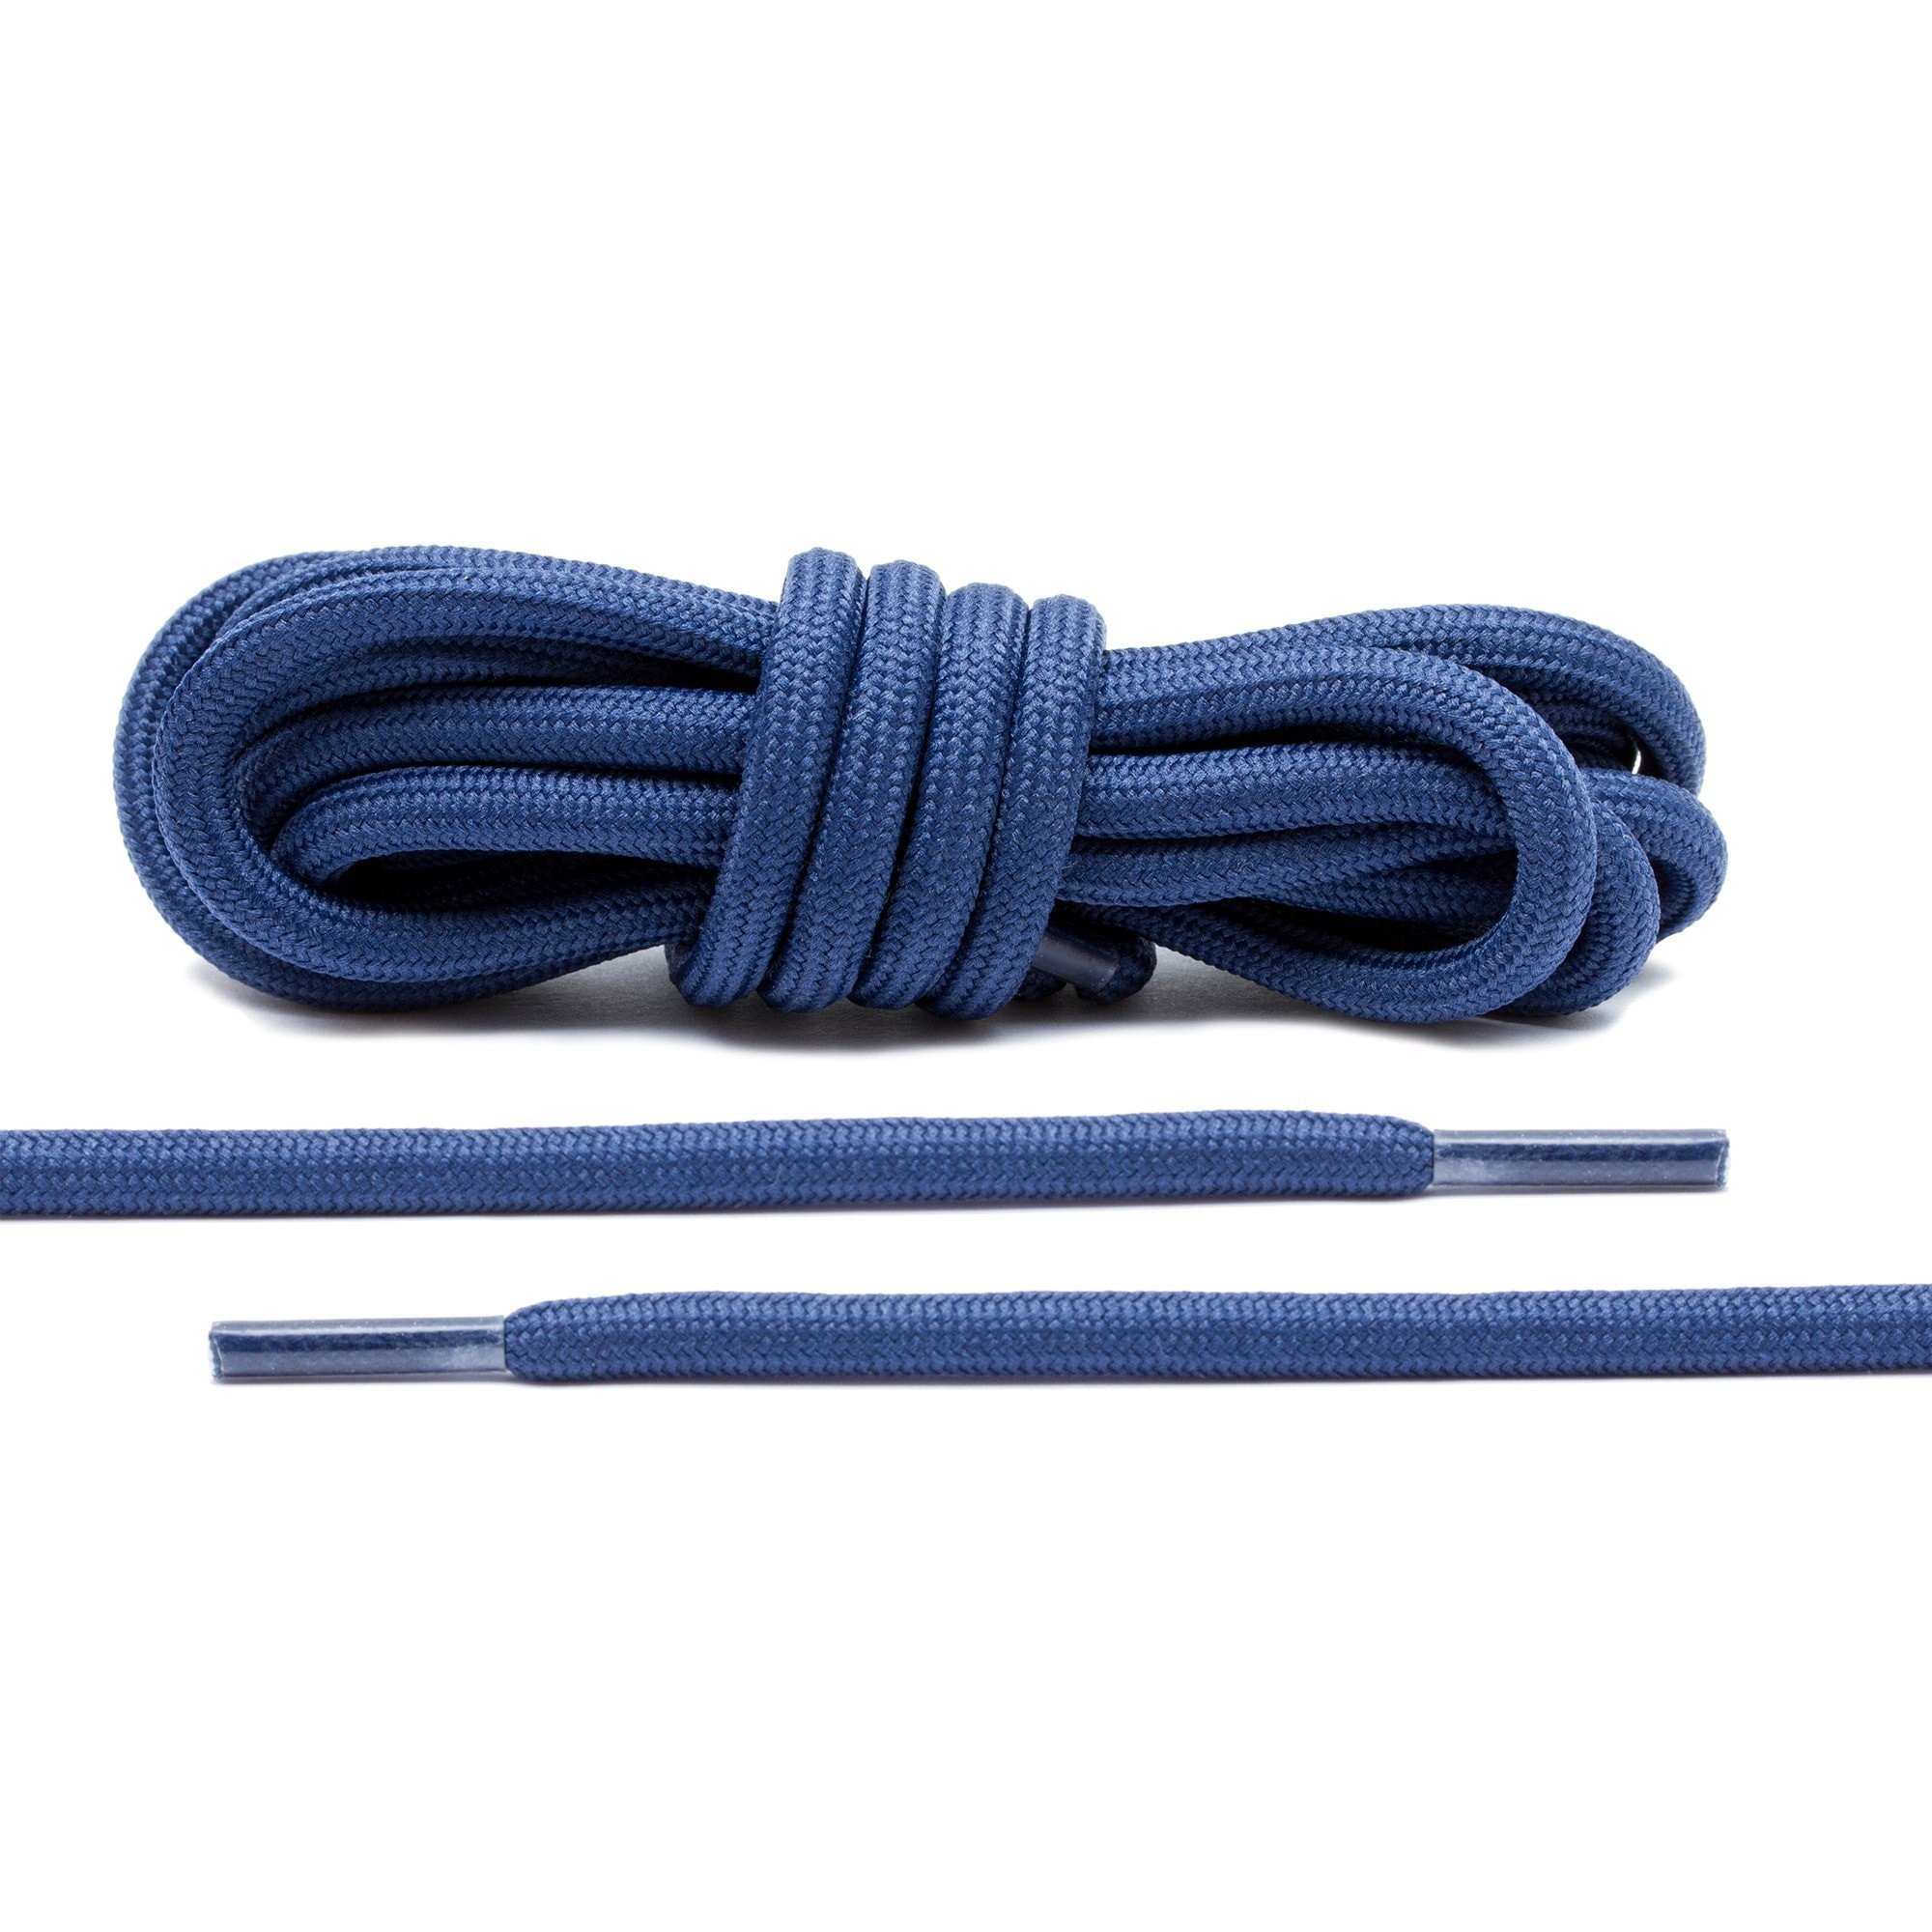 Navy Blue Rope Laces | Lace Lab Rope Laces | Custom Sneaker Laces